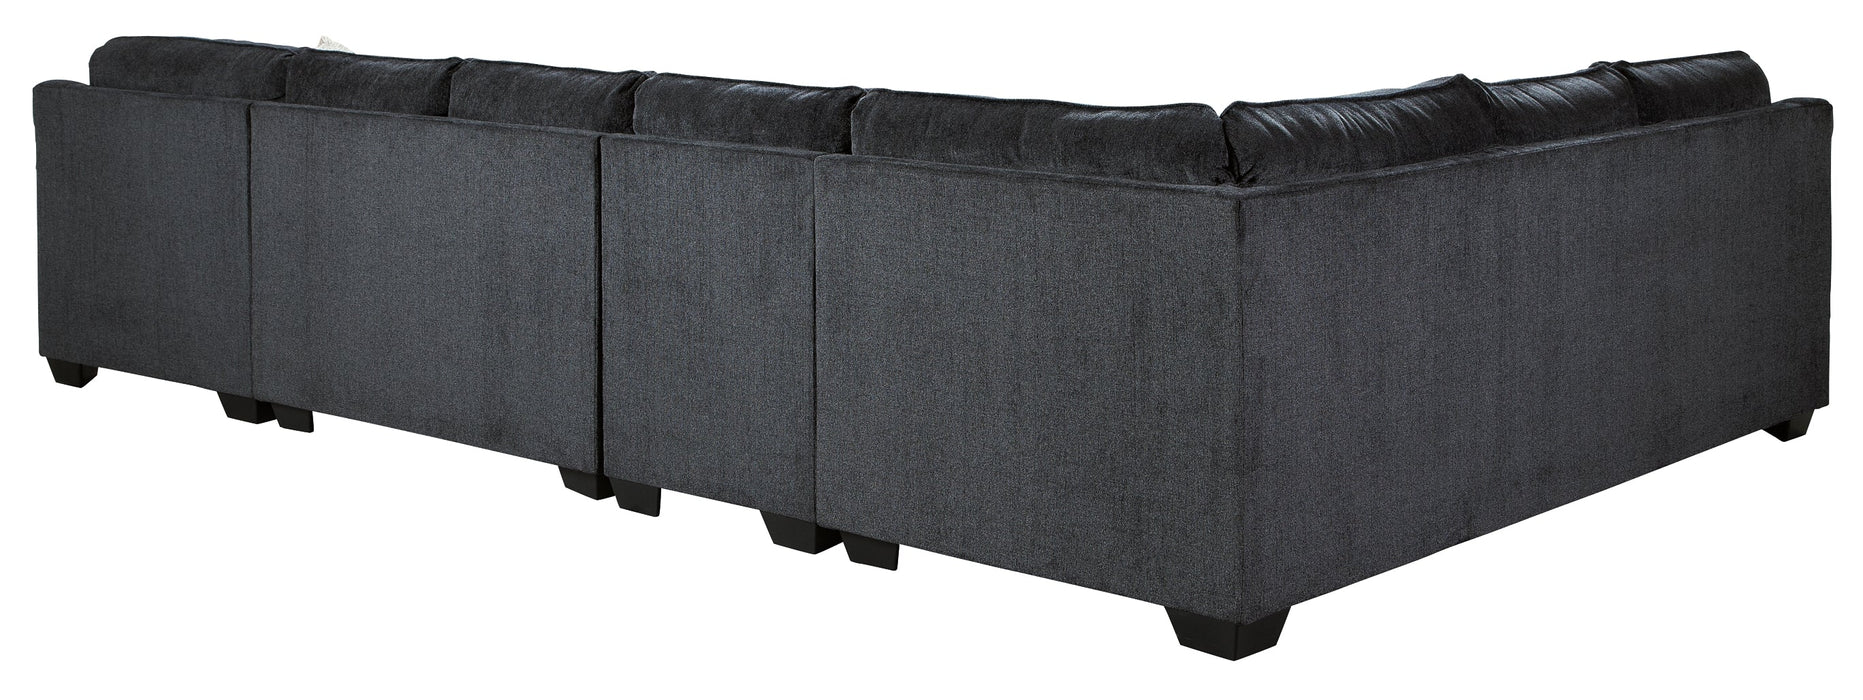 Eltmann 4-Piece Sectional with Chaise JR Furniture Store